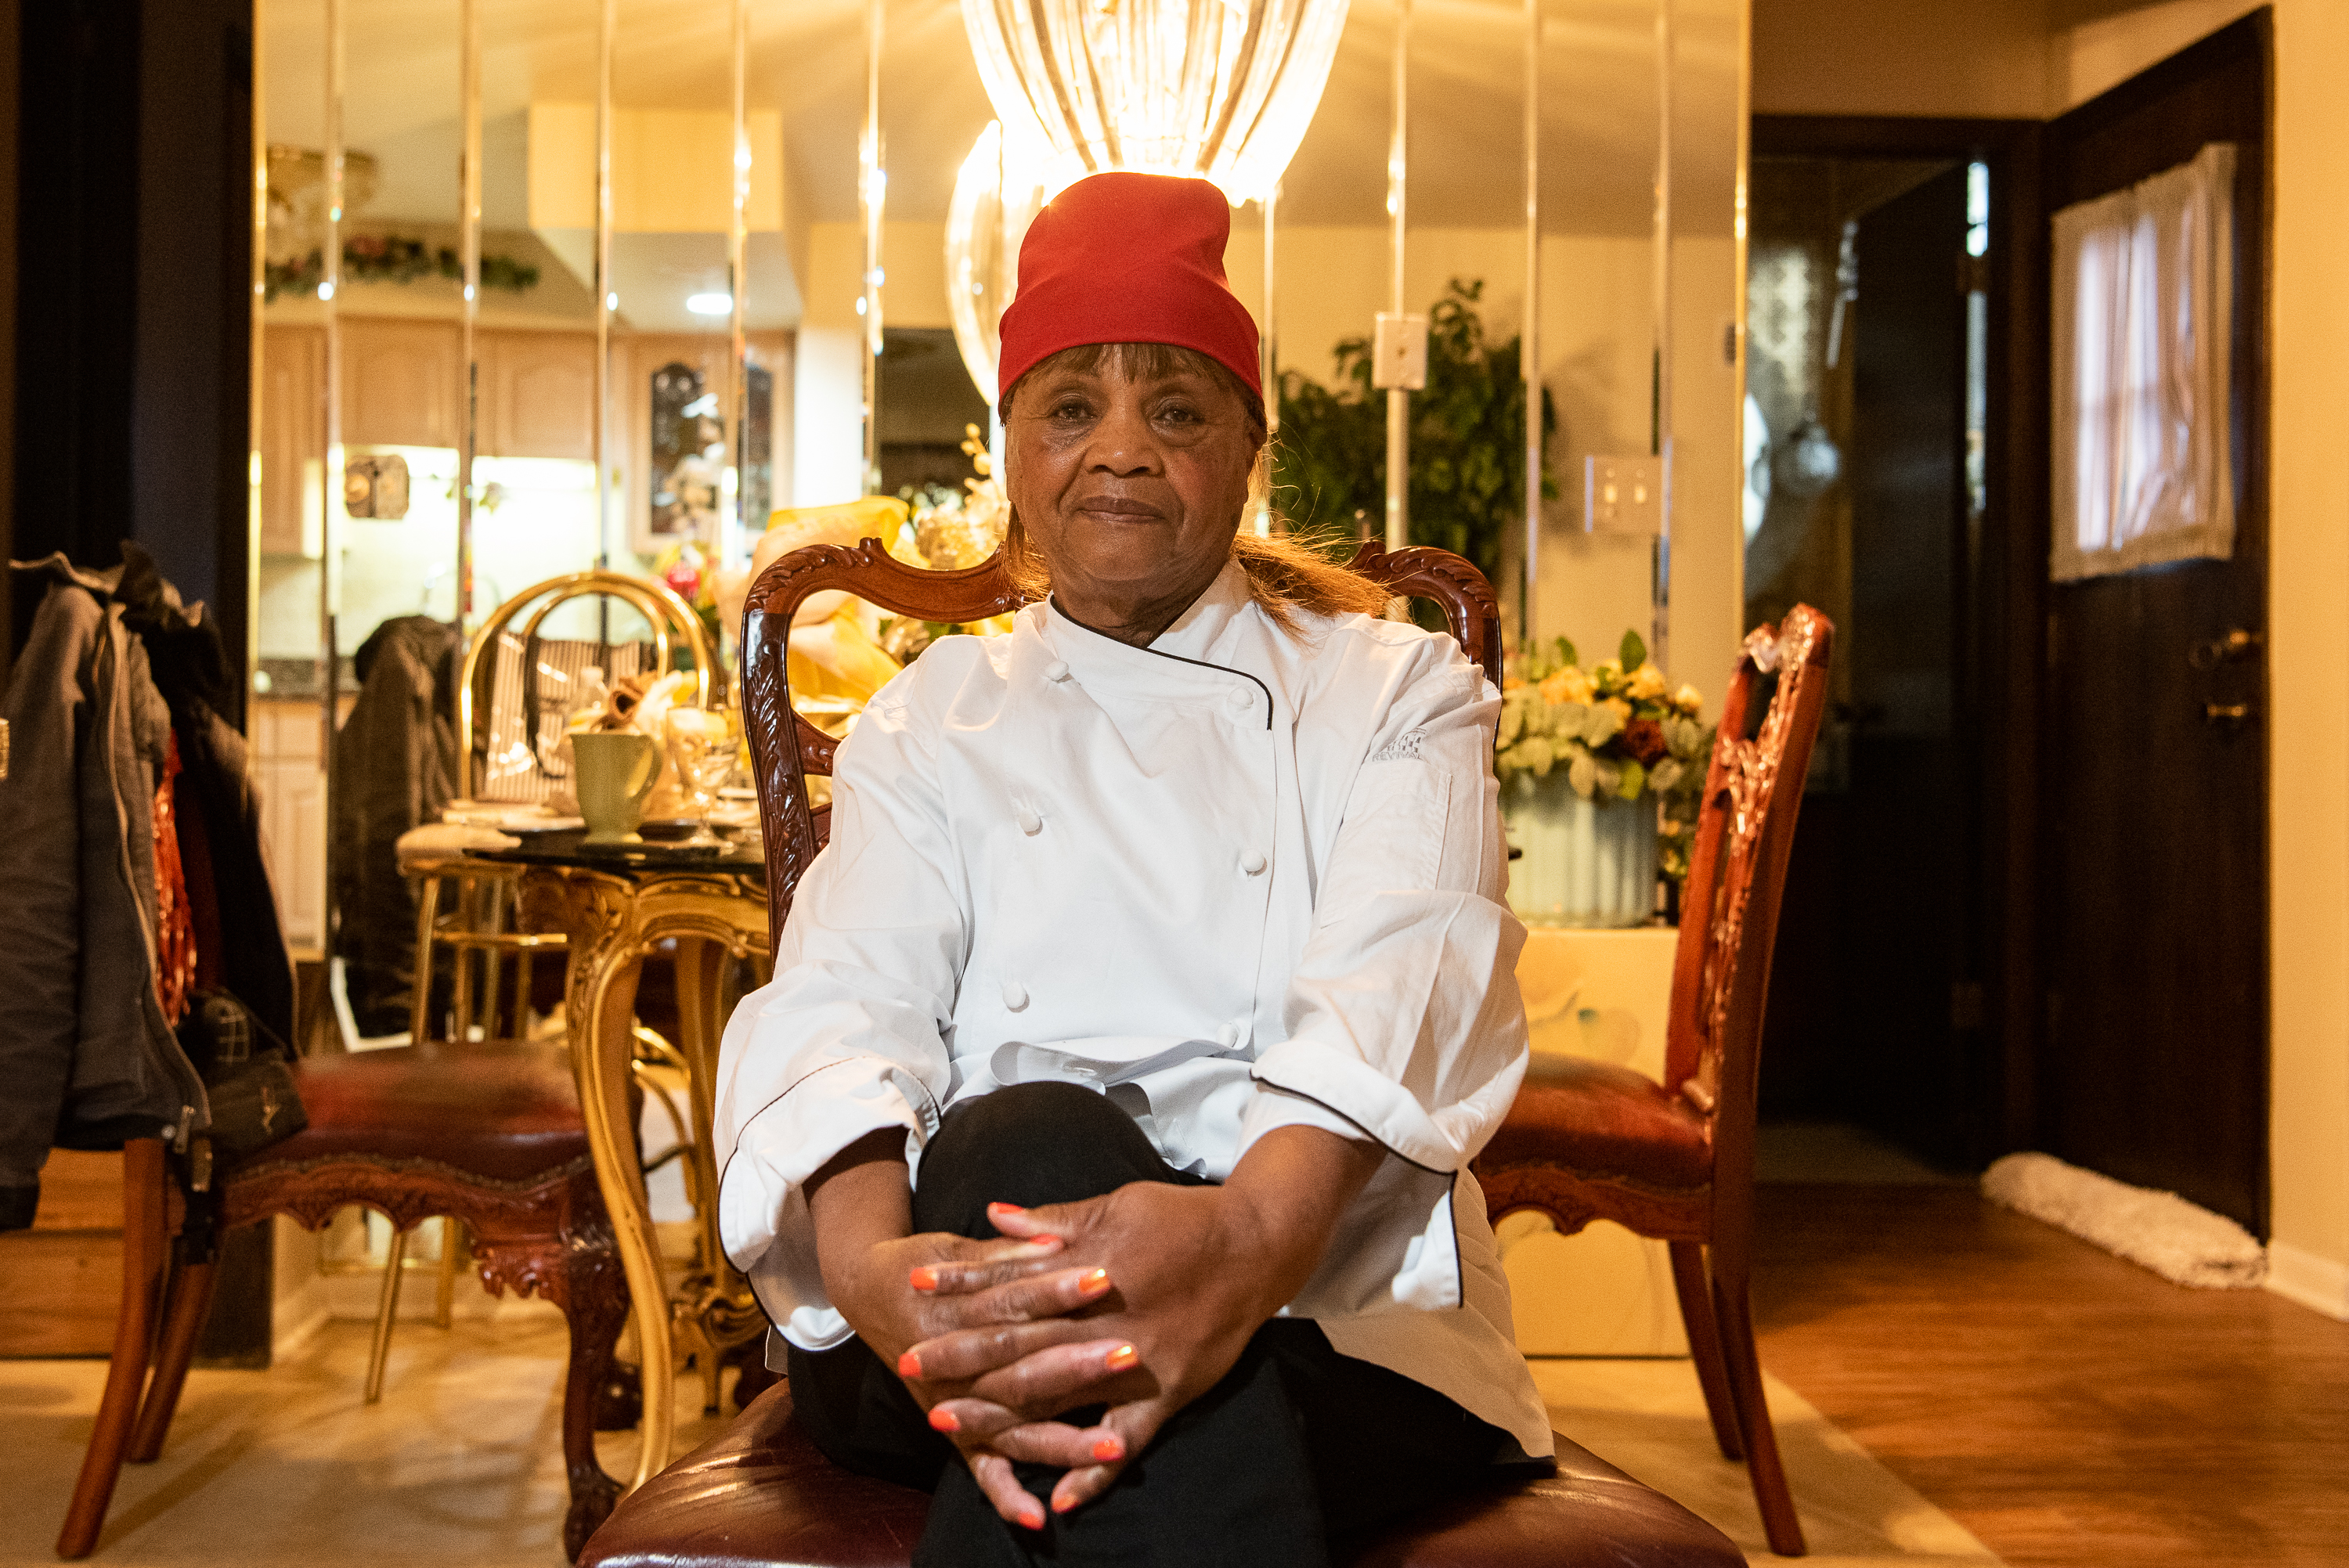 Josephine “Mother” Wade, owner of Josephine’s Southern Cooking in the Chatham neighborhood, will have two recipes featured in a cookbook highlighting chefs from around the world.